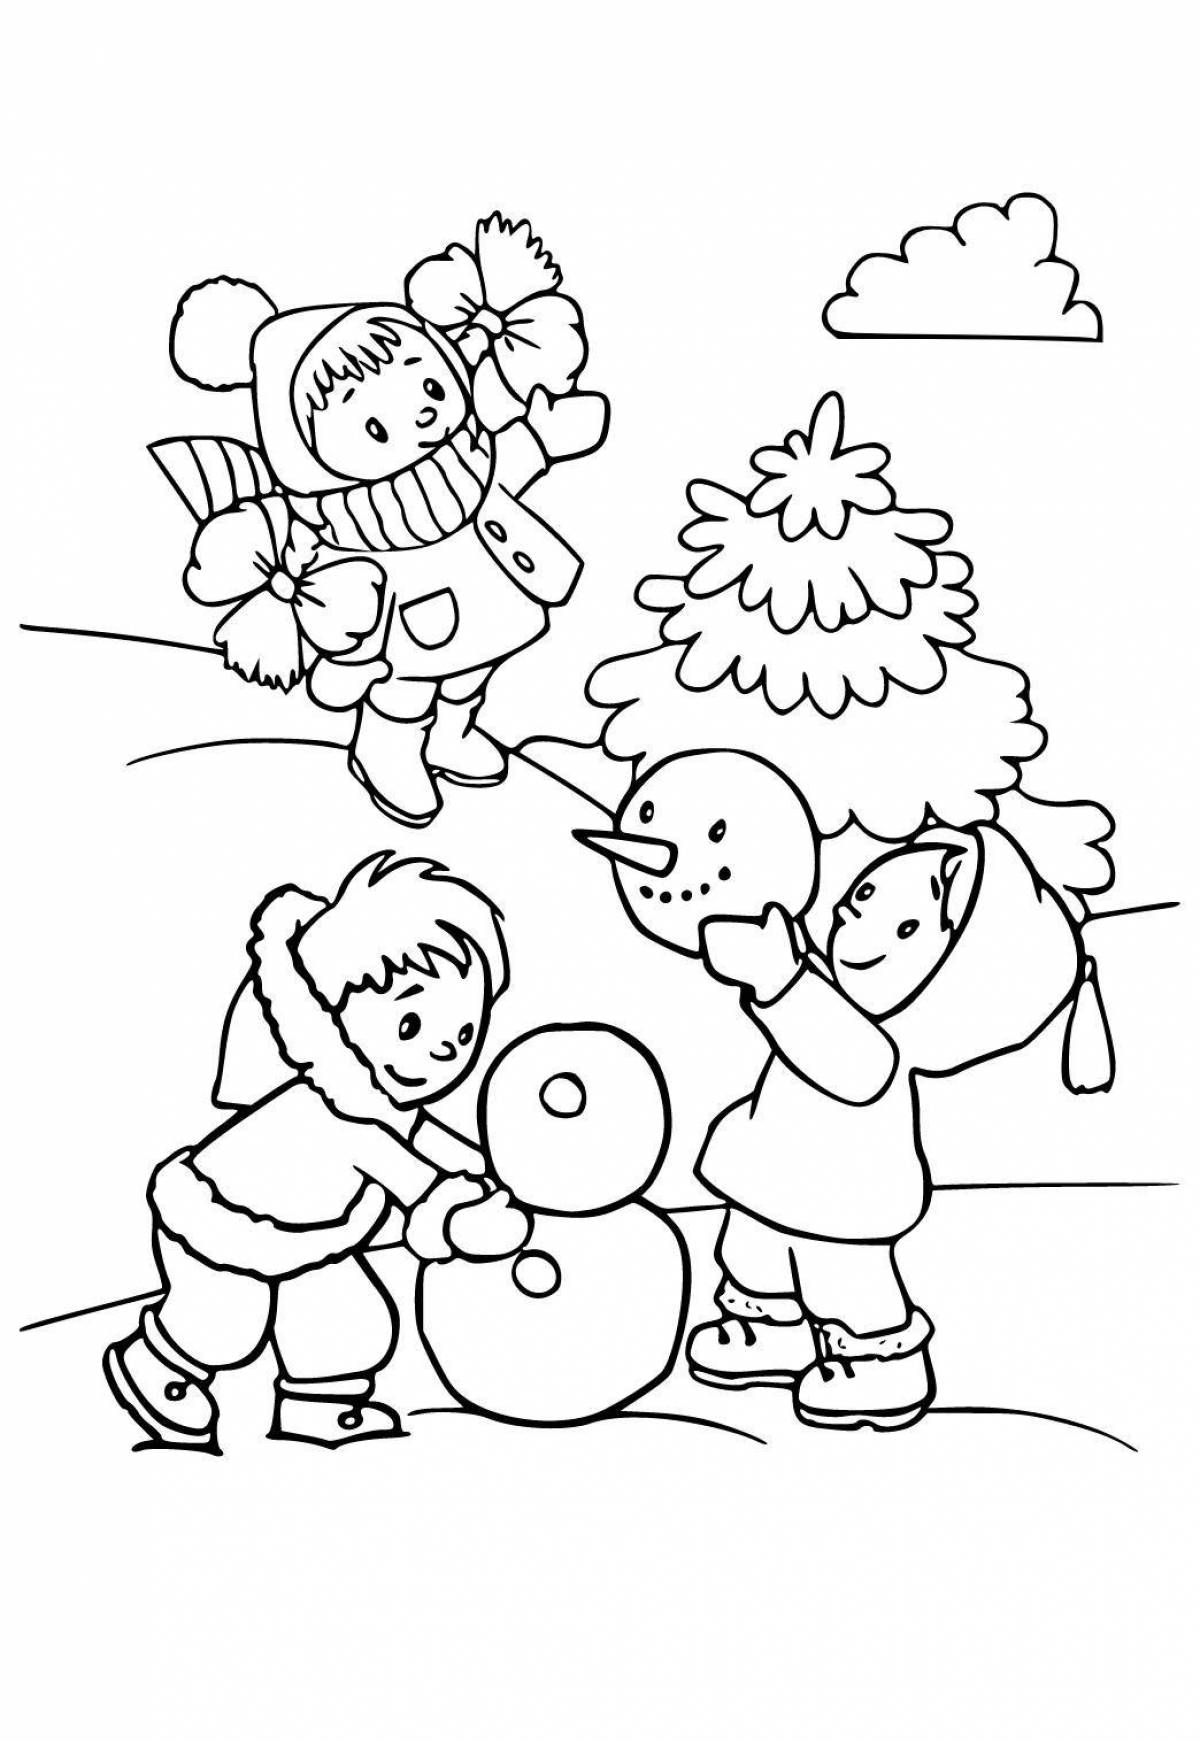 For children 3 years old winter #2